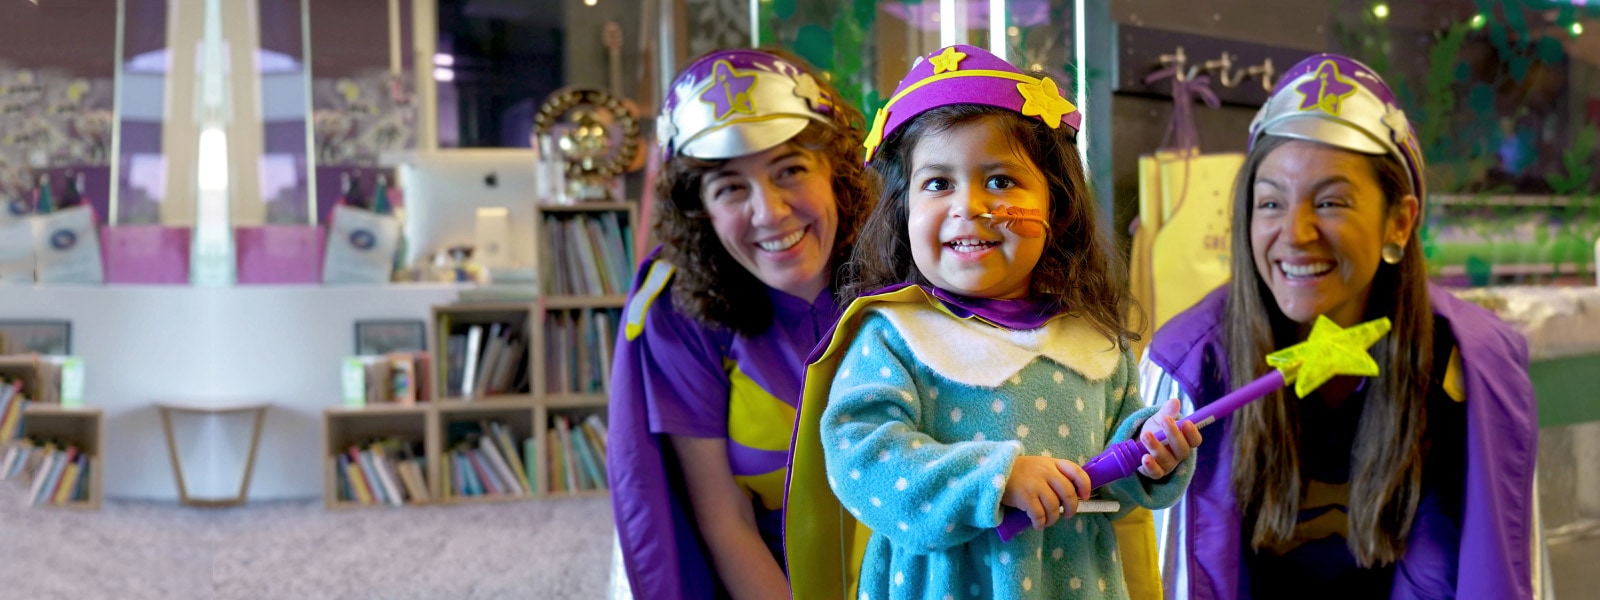 Two adult volunteers in costumes laugh alongside a small child dressed in a costume holding a wand